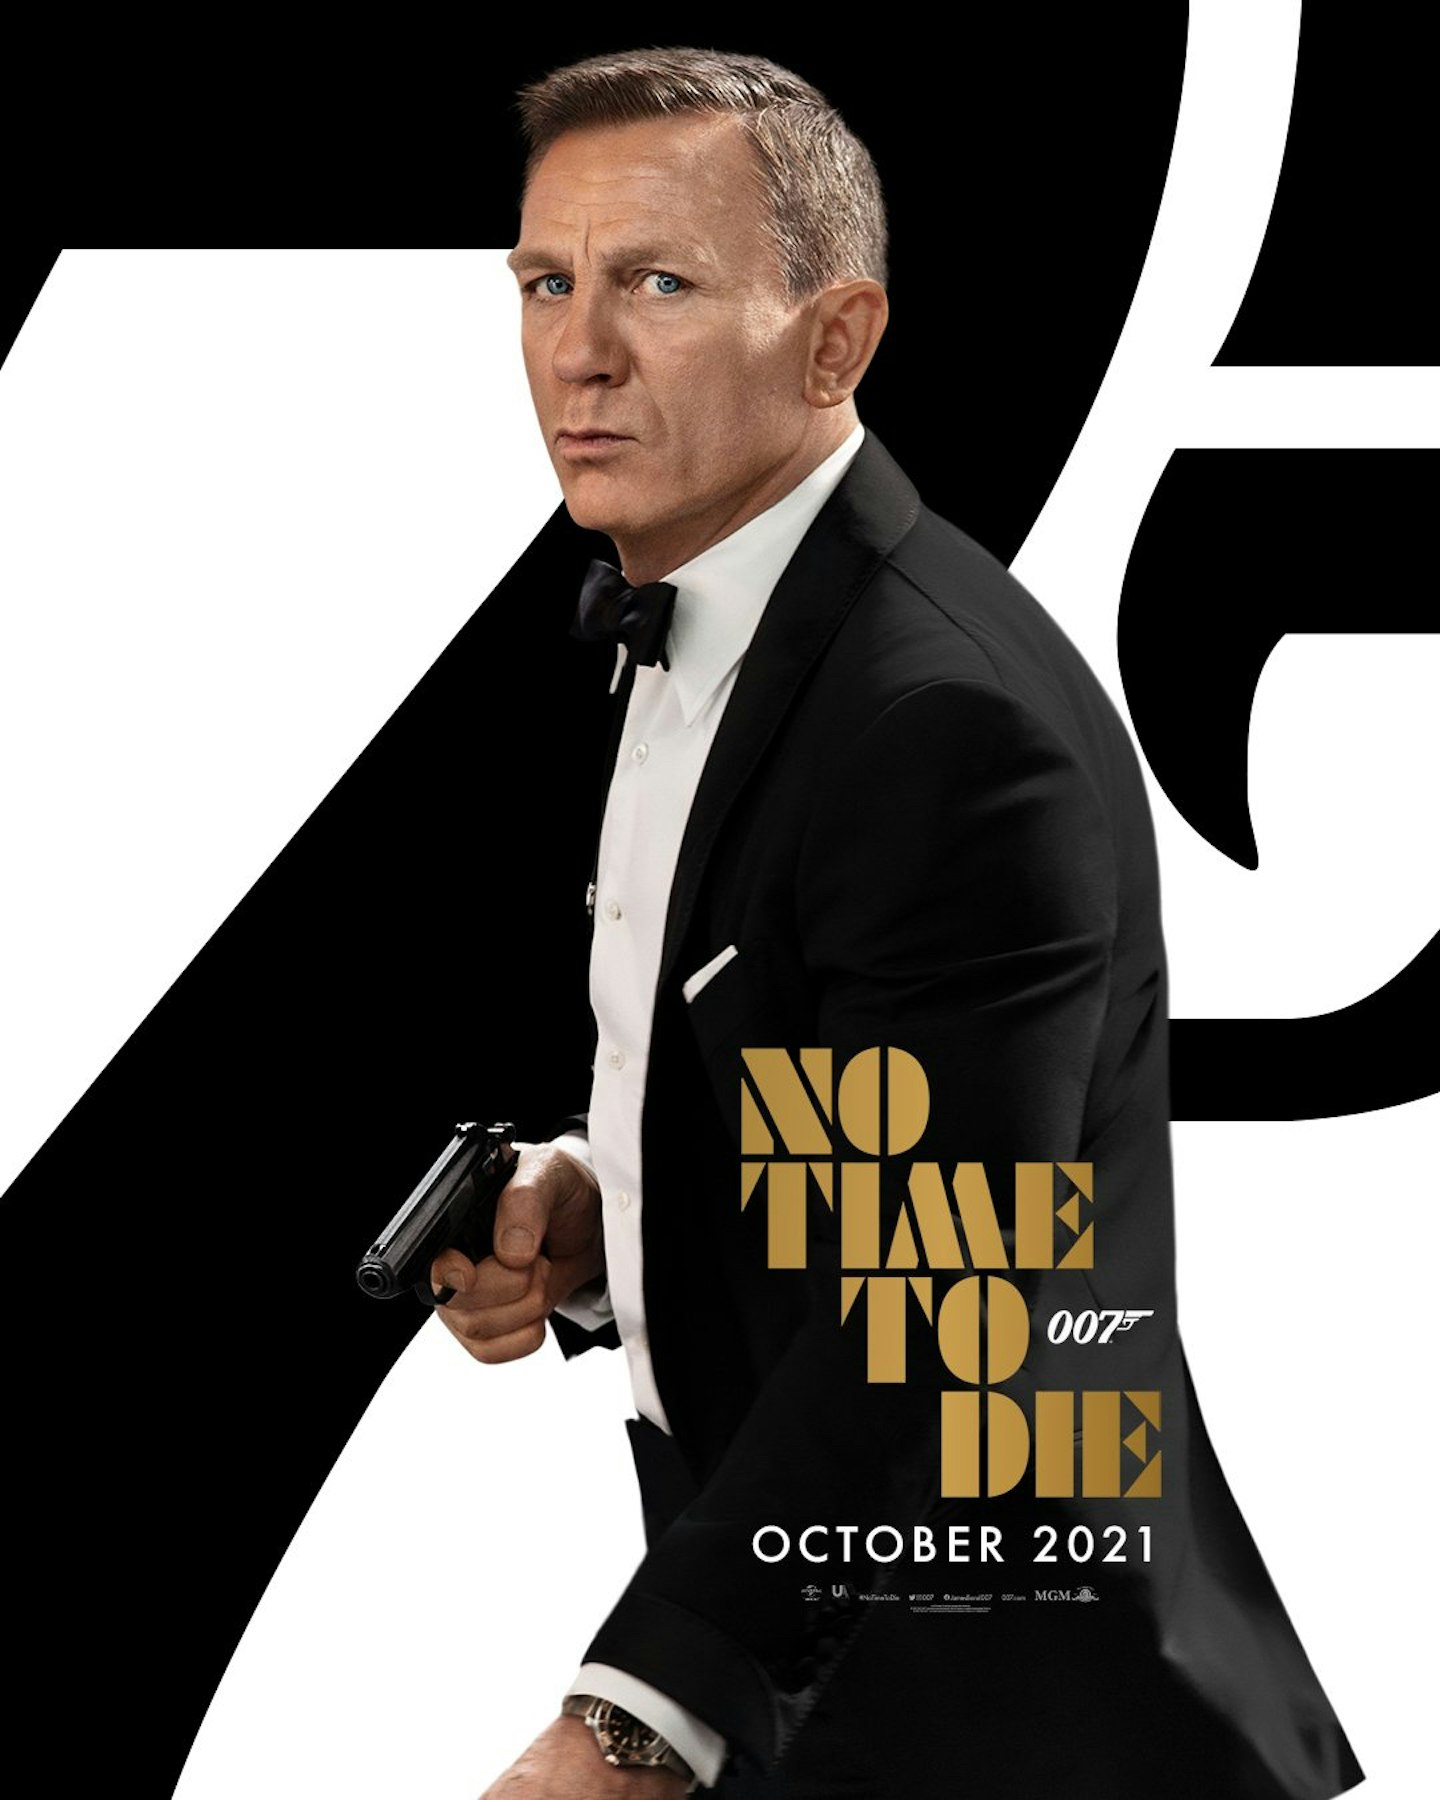 No Time To Die poster – Oct 2021 move